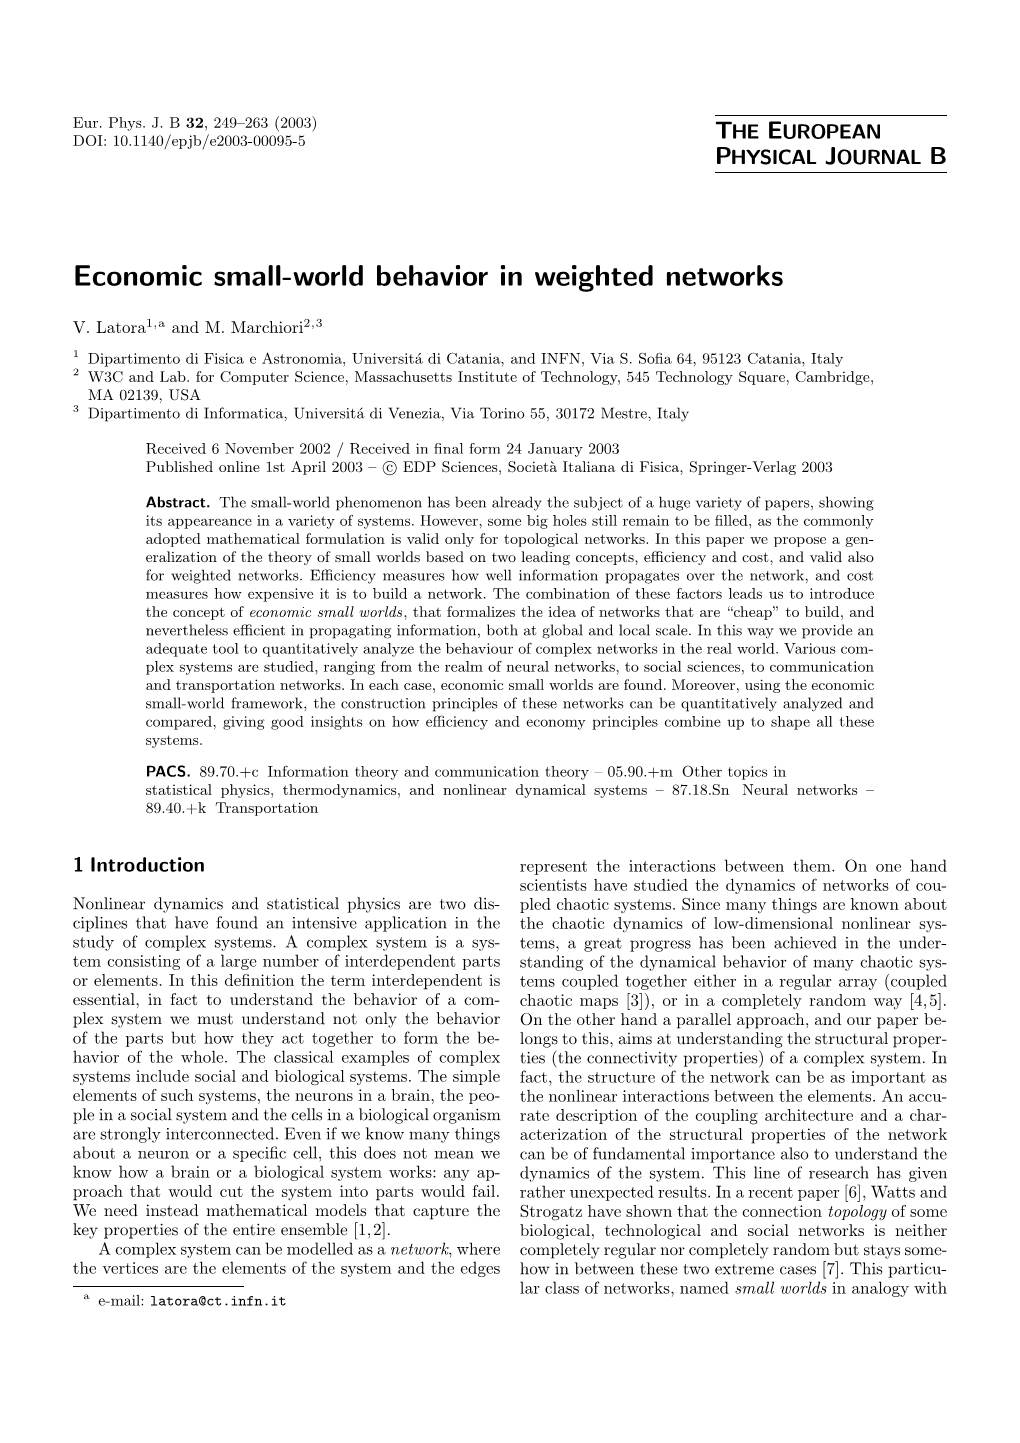 Economic Small-World Behavior in Weighted Networks